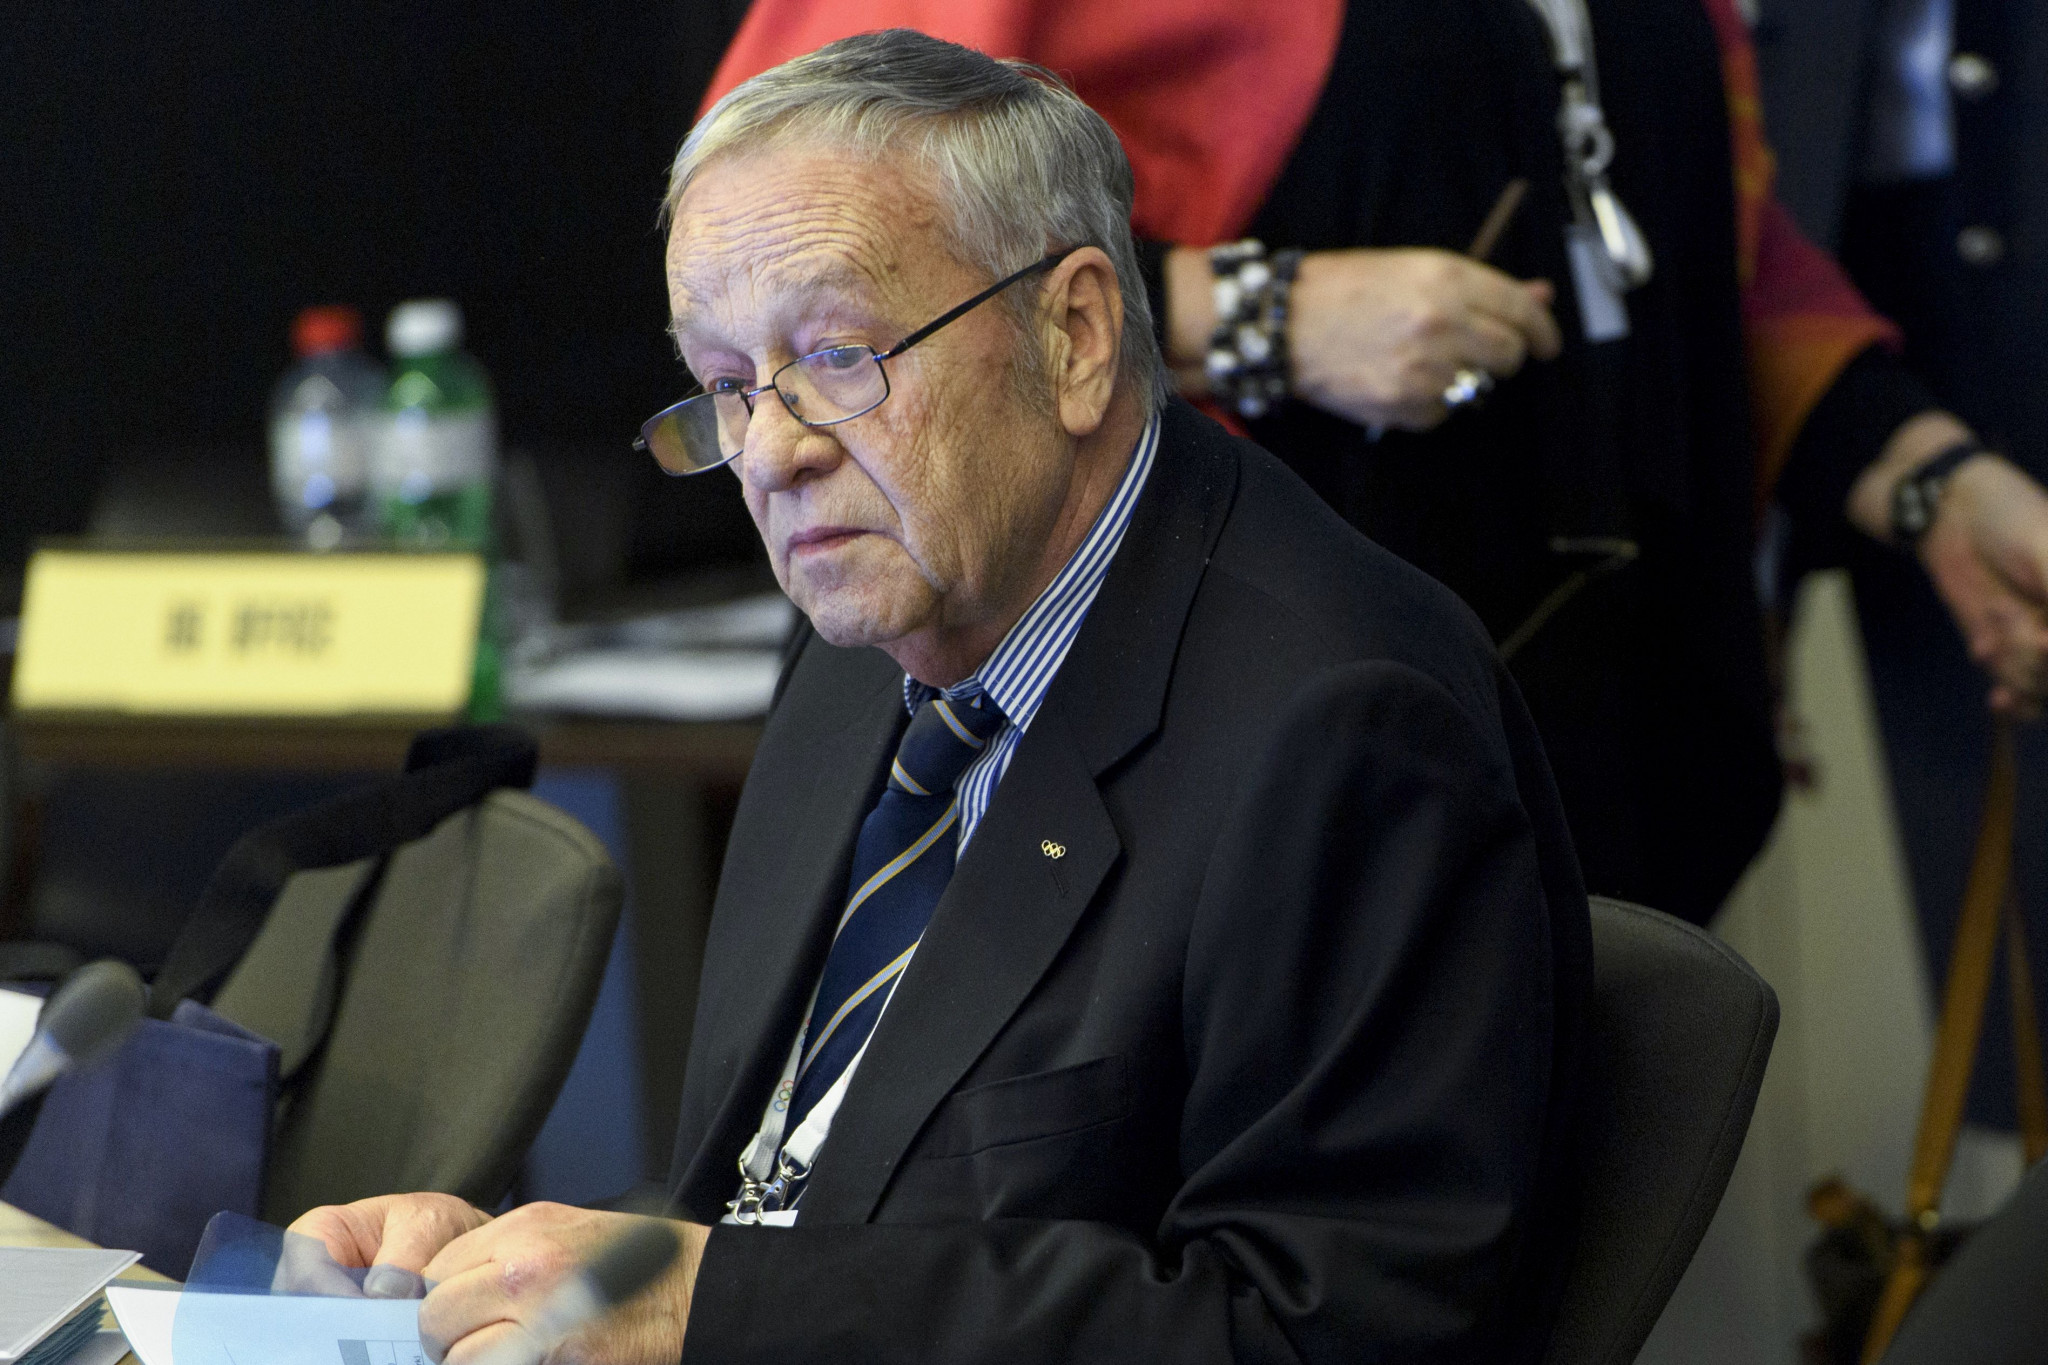 The FIS Congress, where Gian-Franco Kasper's successor will be named, could be impacted by the pandemic ©Getty Images